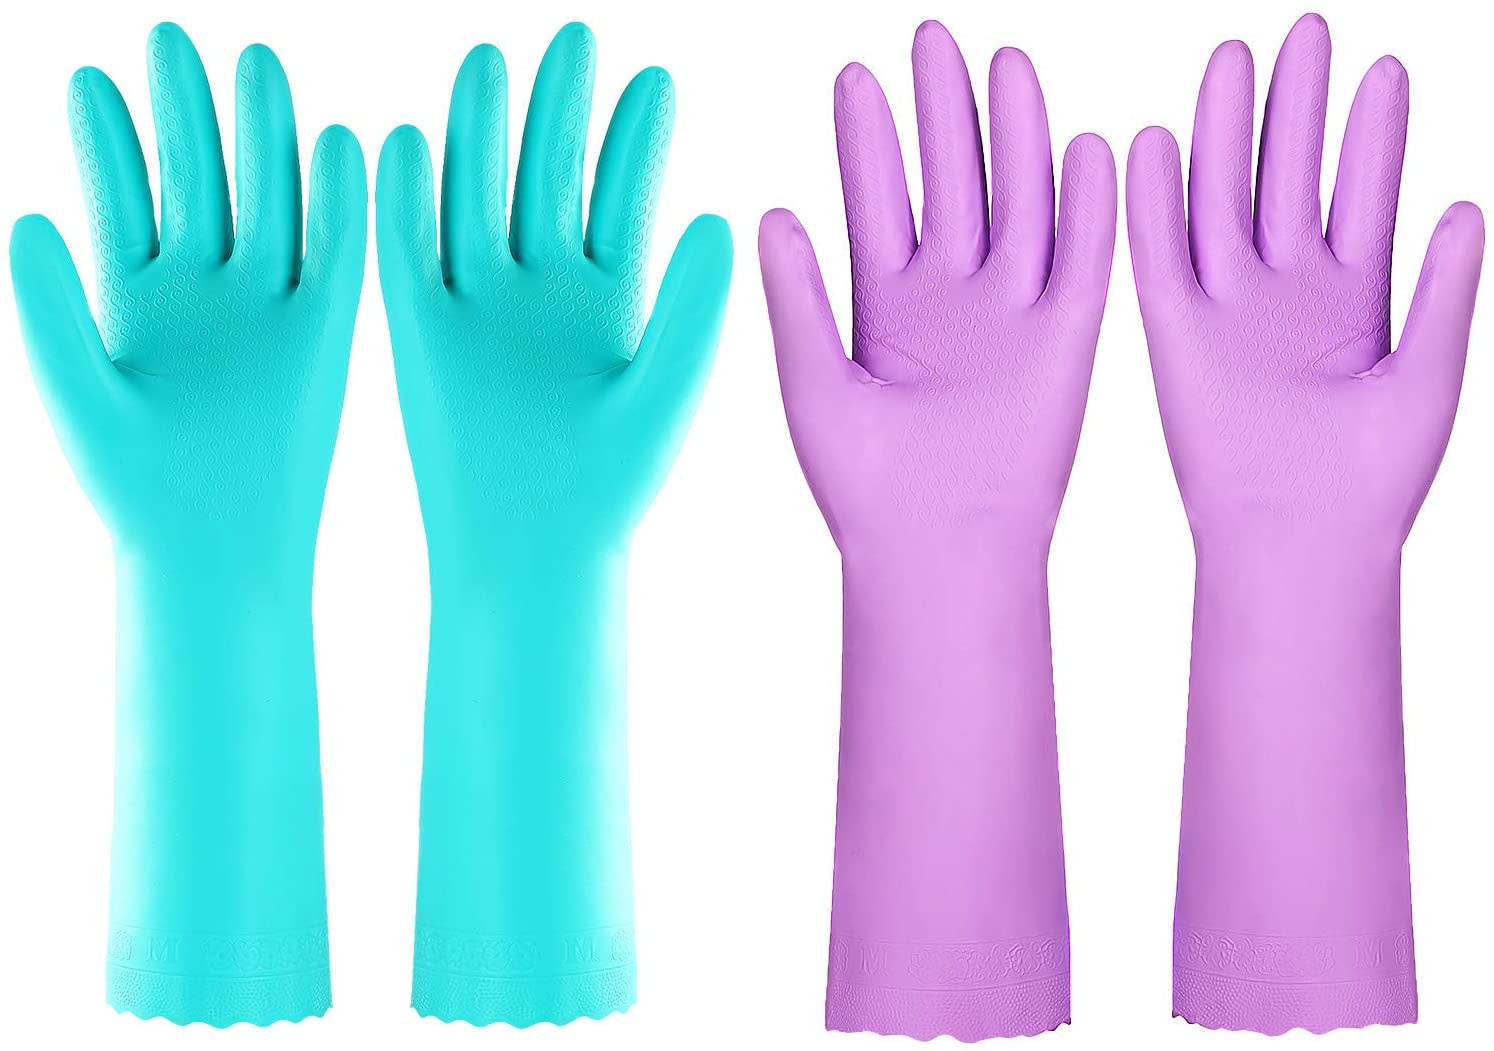 Reusable Dishwashing Cleaning Gloves with Latex Free Long Cuff,Cotton Gloves 2 